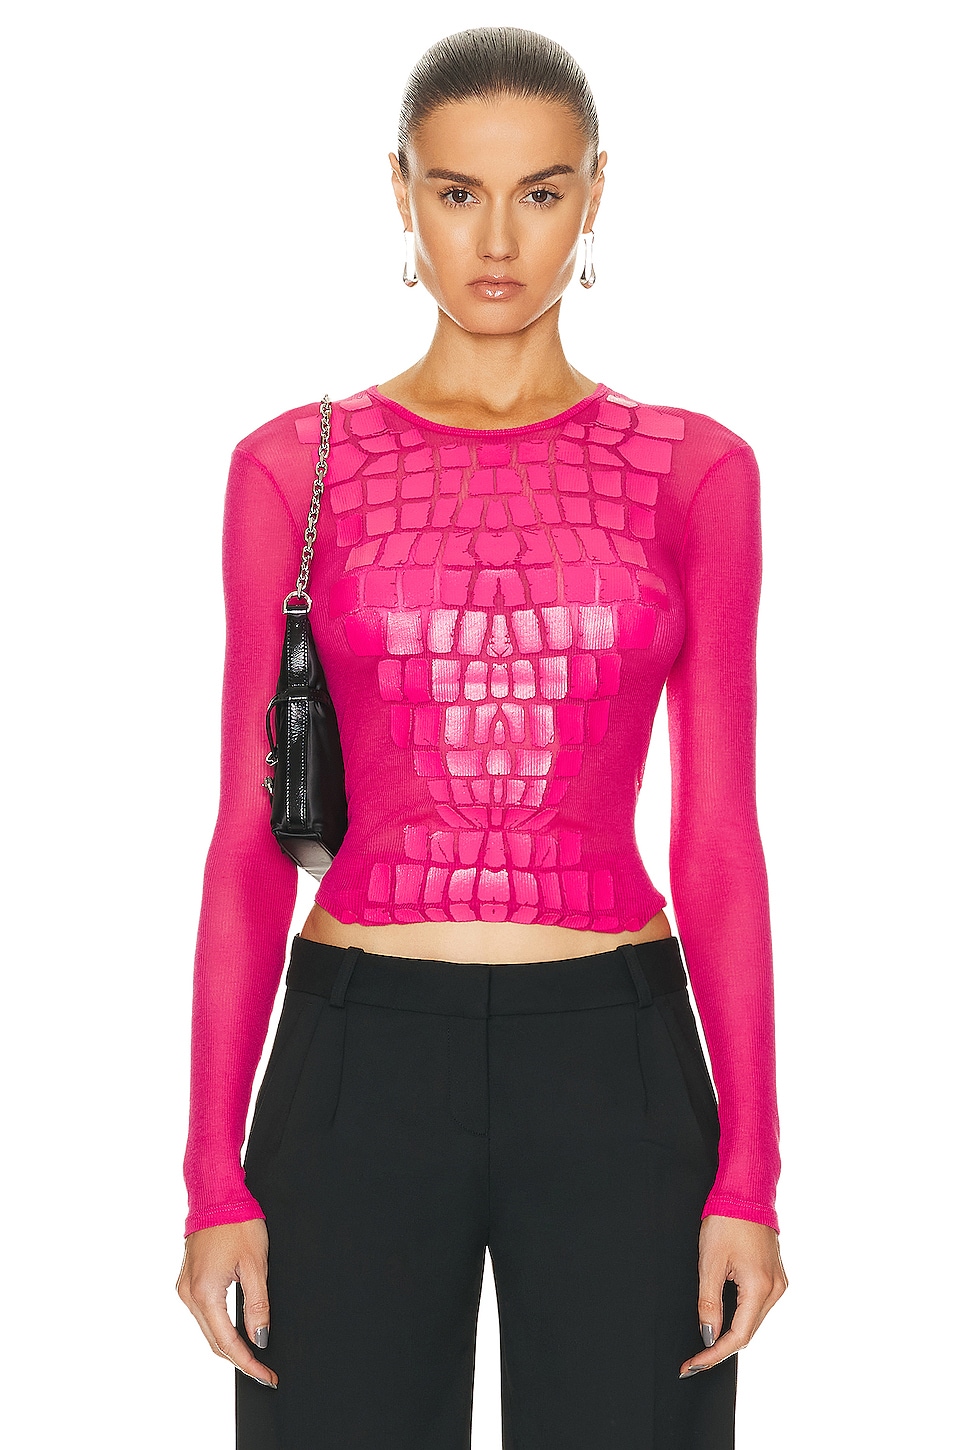 Image 1 of Dion Lee Crocskin Plastisol Long Sleeve Top in Candy